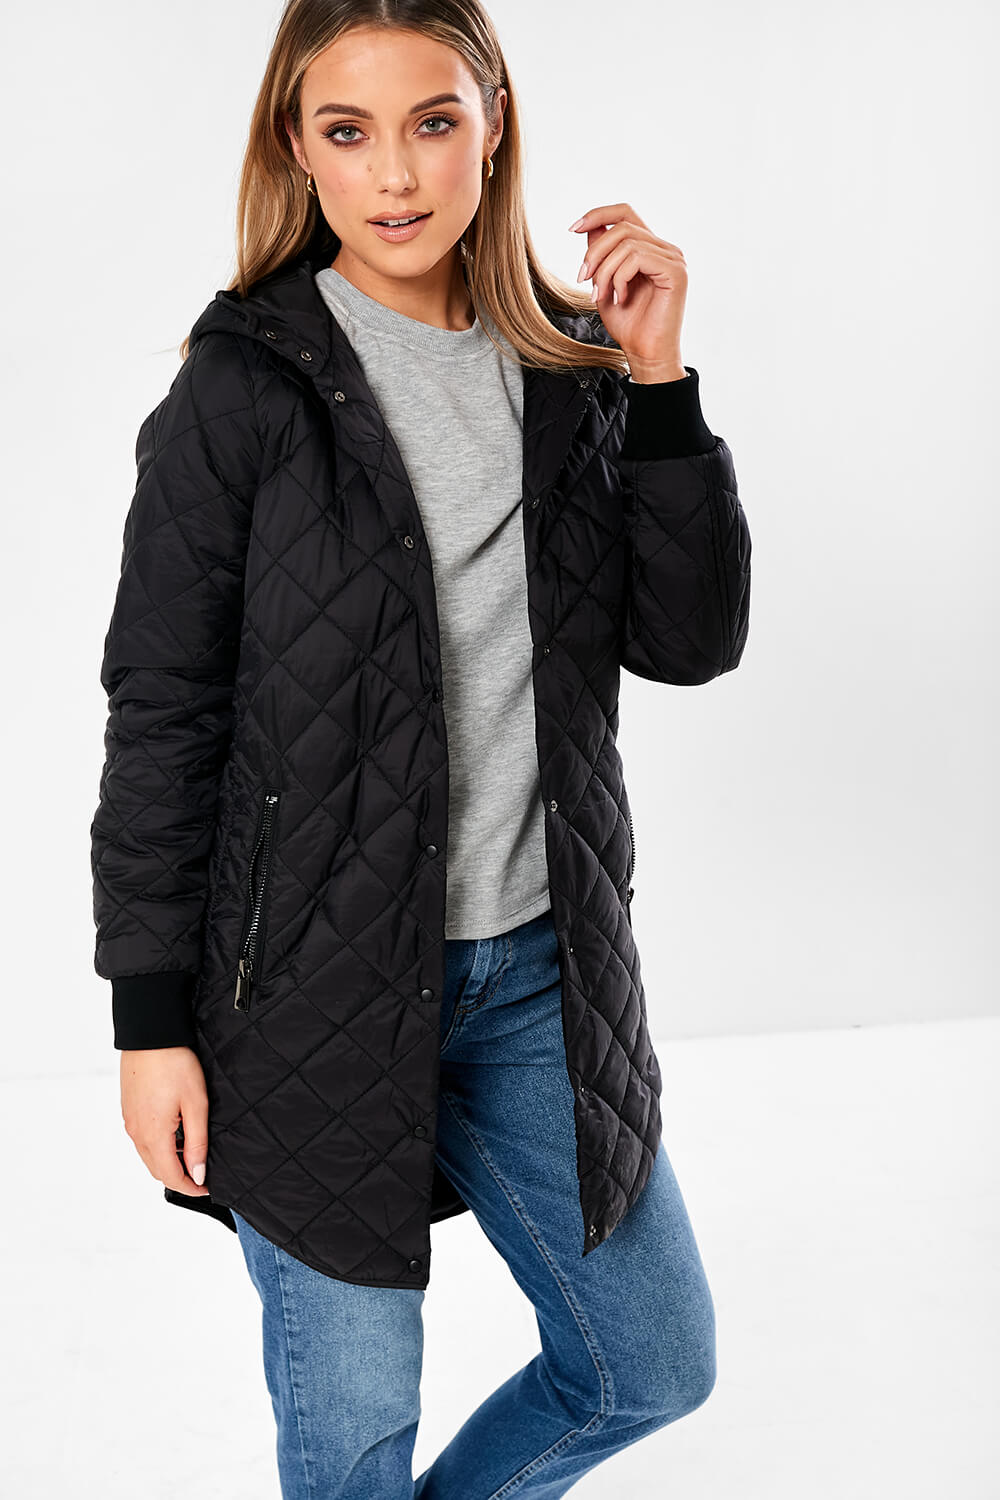 Vero Hayle Quilted Black | - iCLOTHING